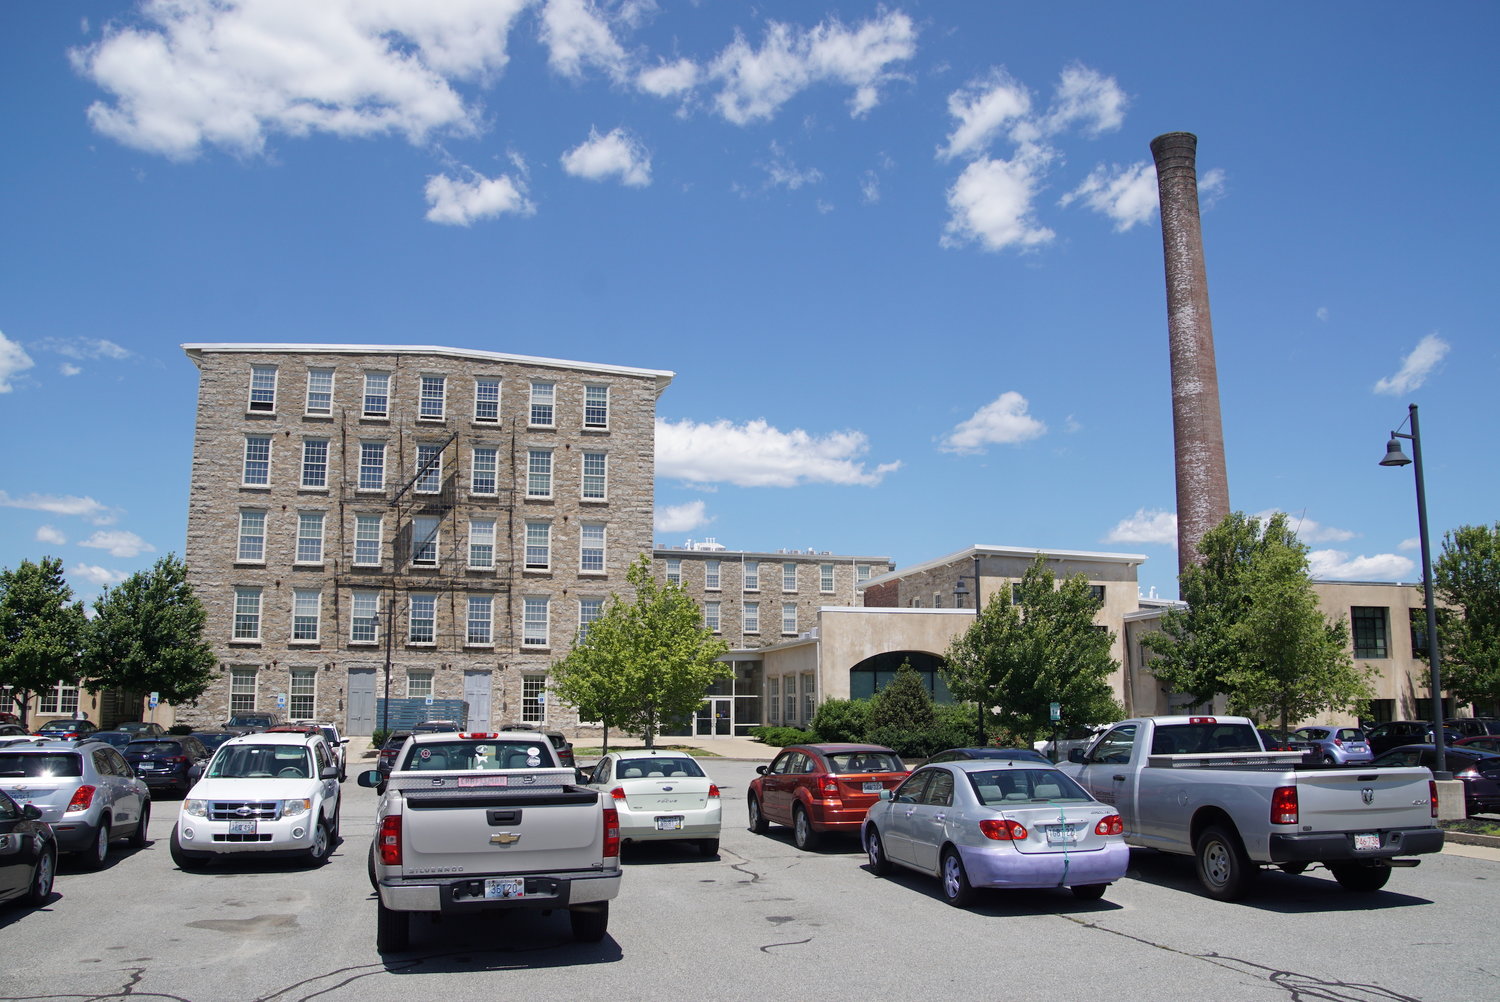 The Bourne Mills could soon see a large increase in residence as a new building is in the planning stages.